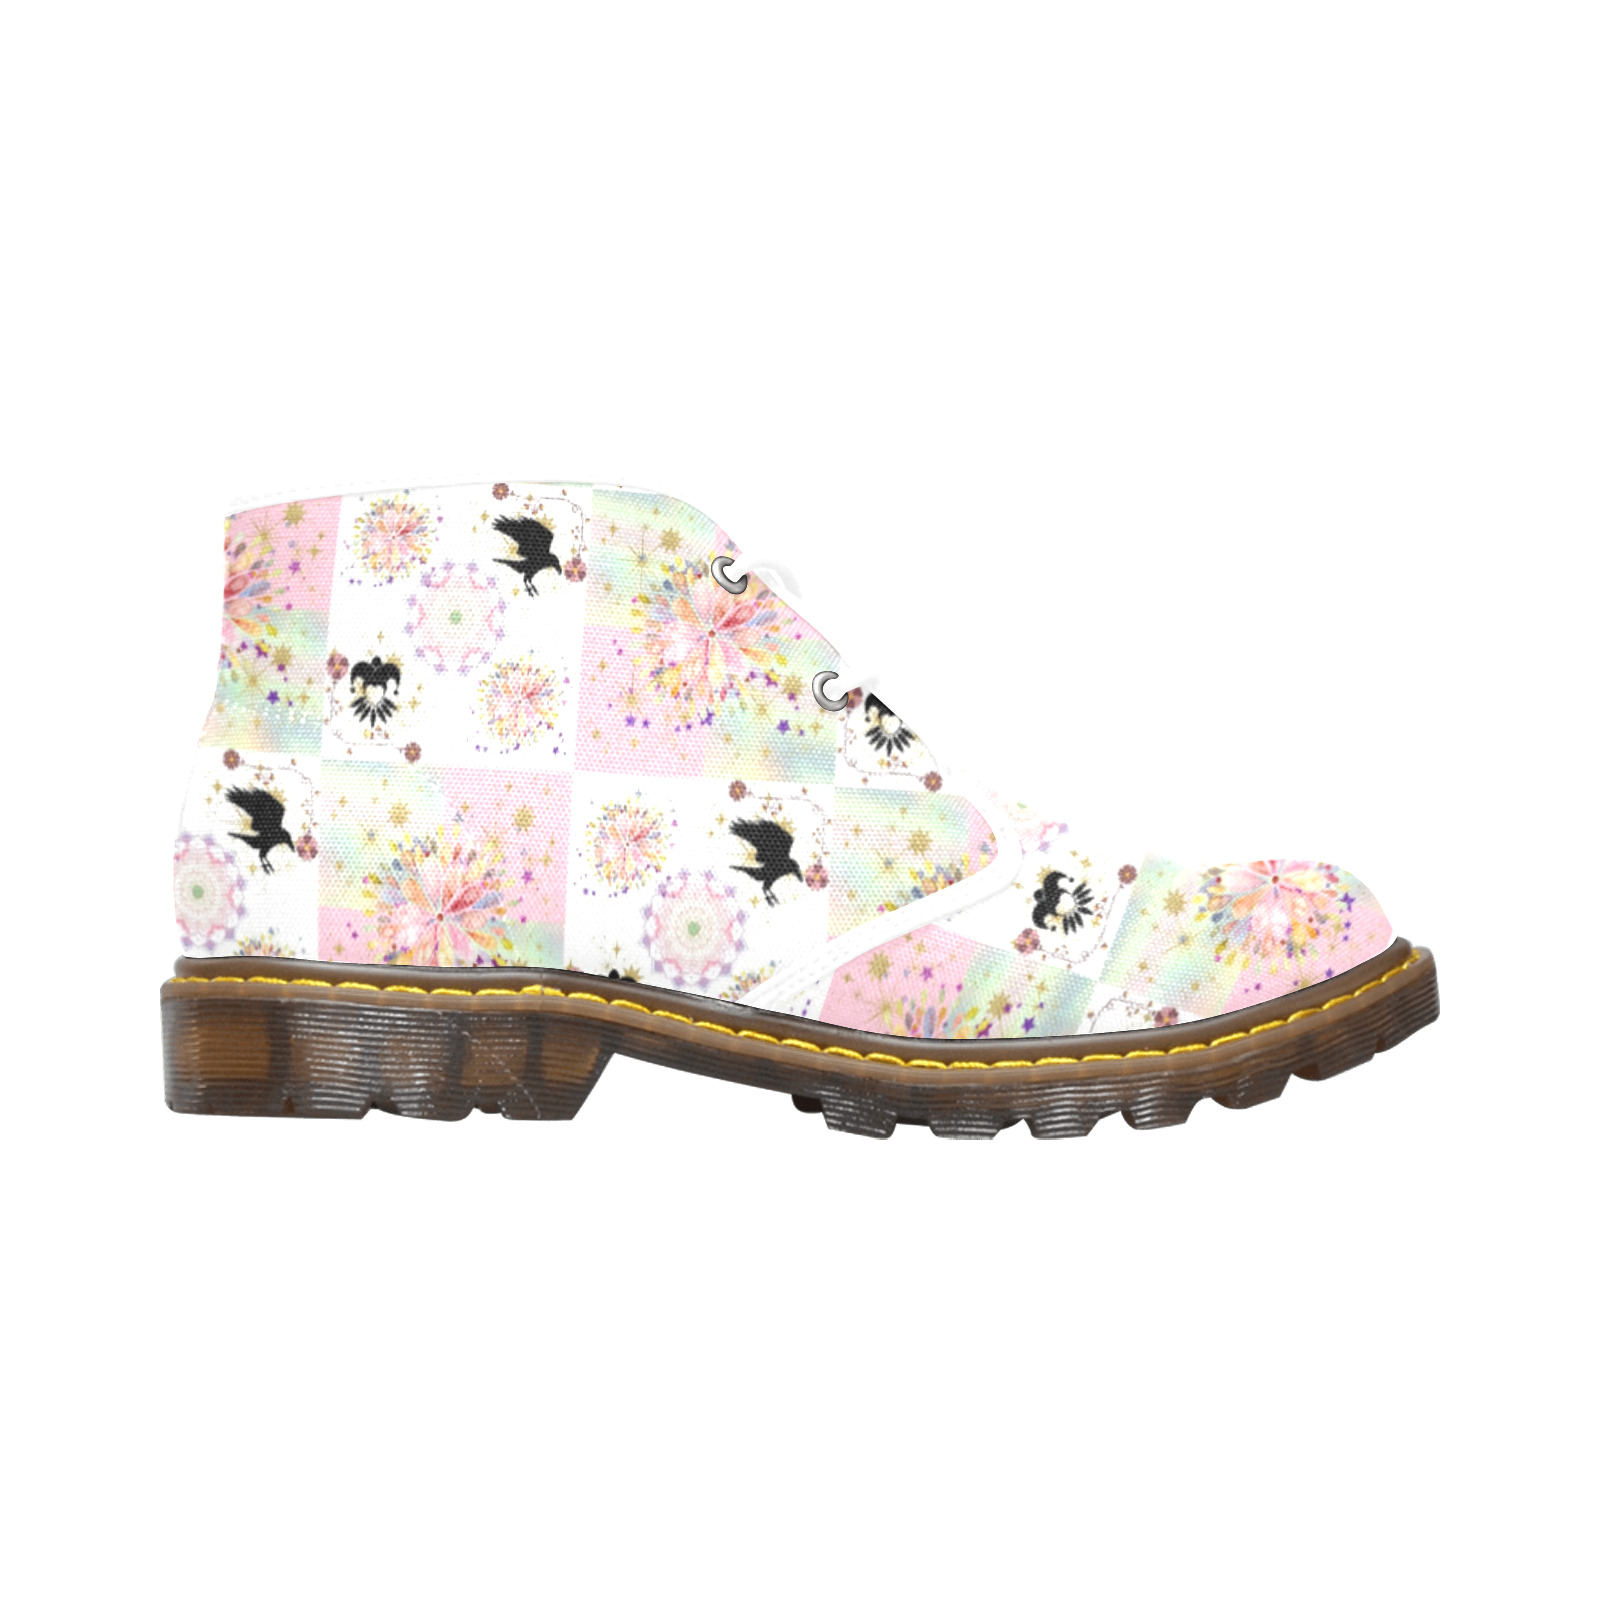 Secret Garden With Harlequin and Crow Patch Artwork Women's Canvas Chukka Boots (Model 2402-1)